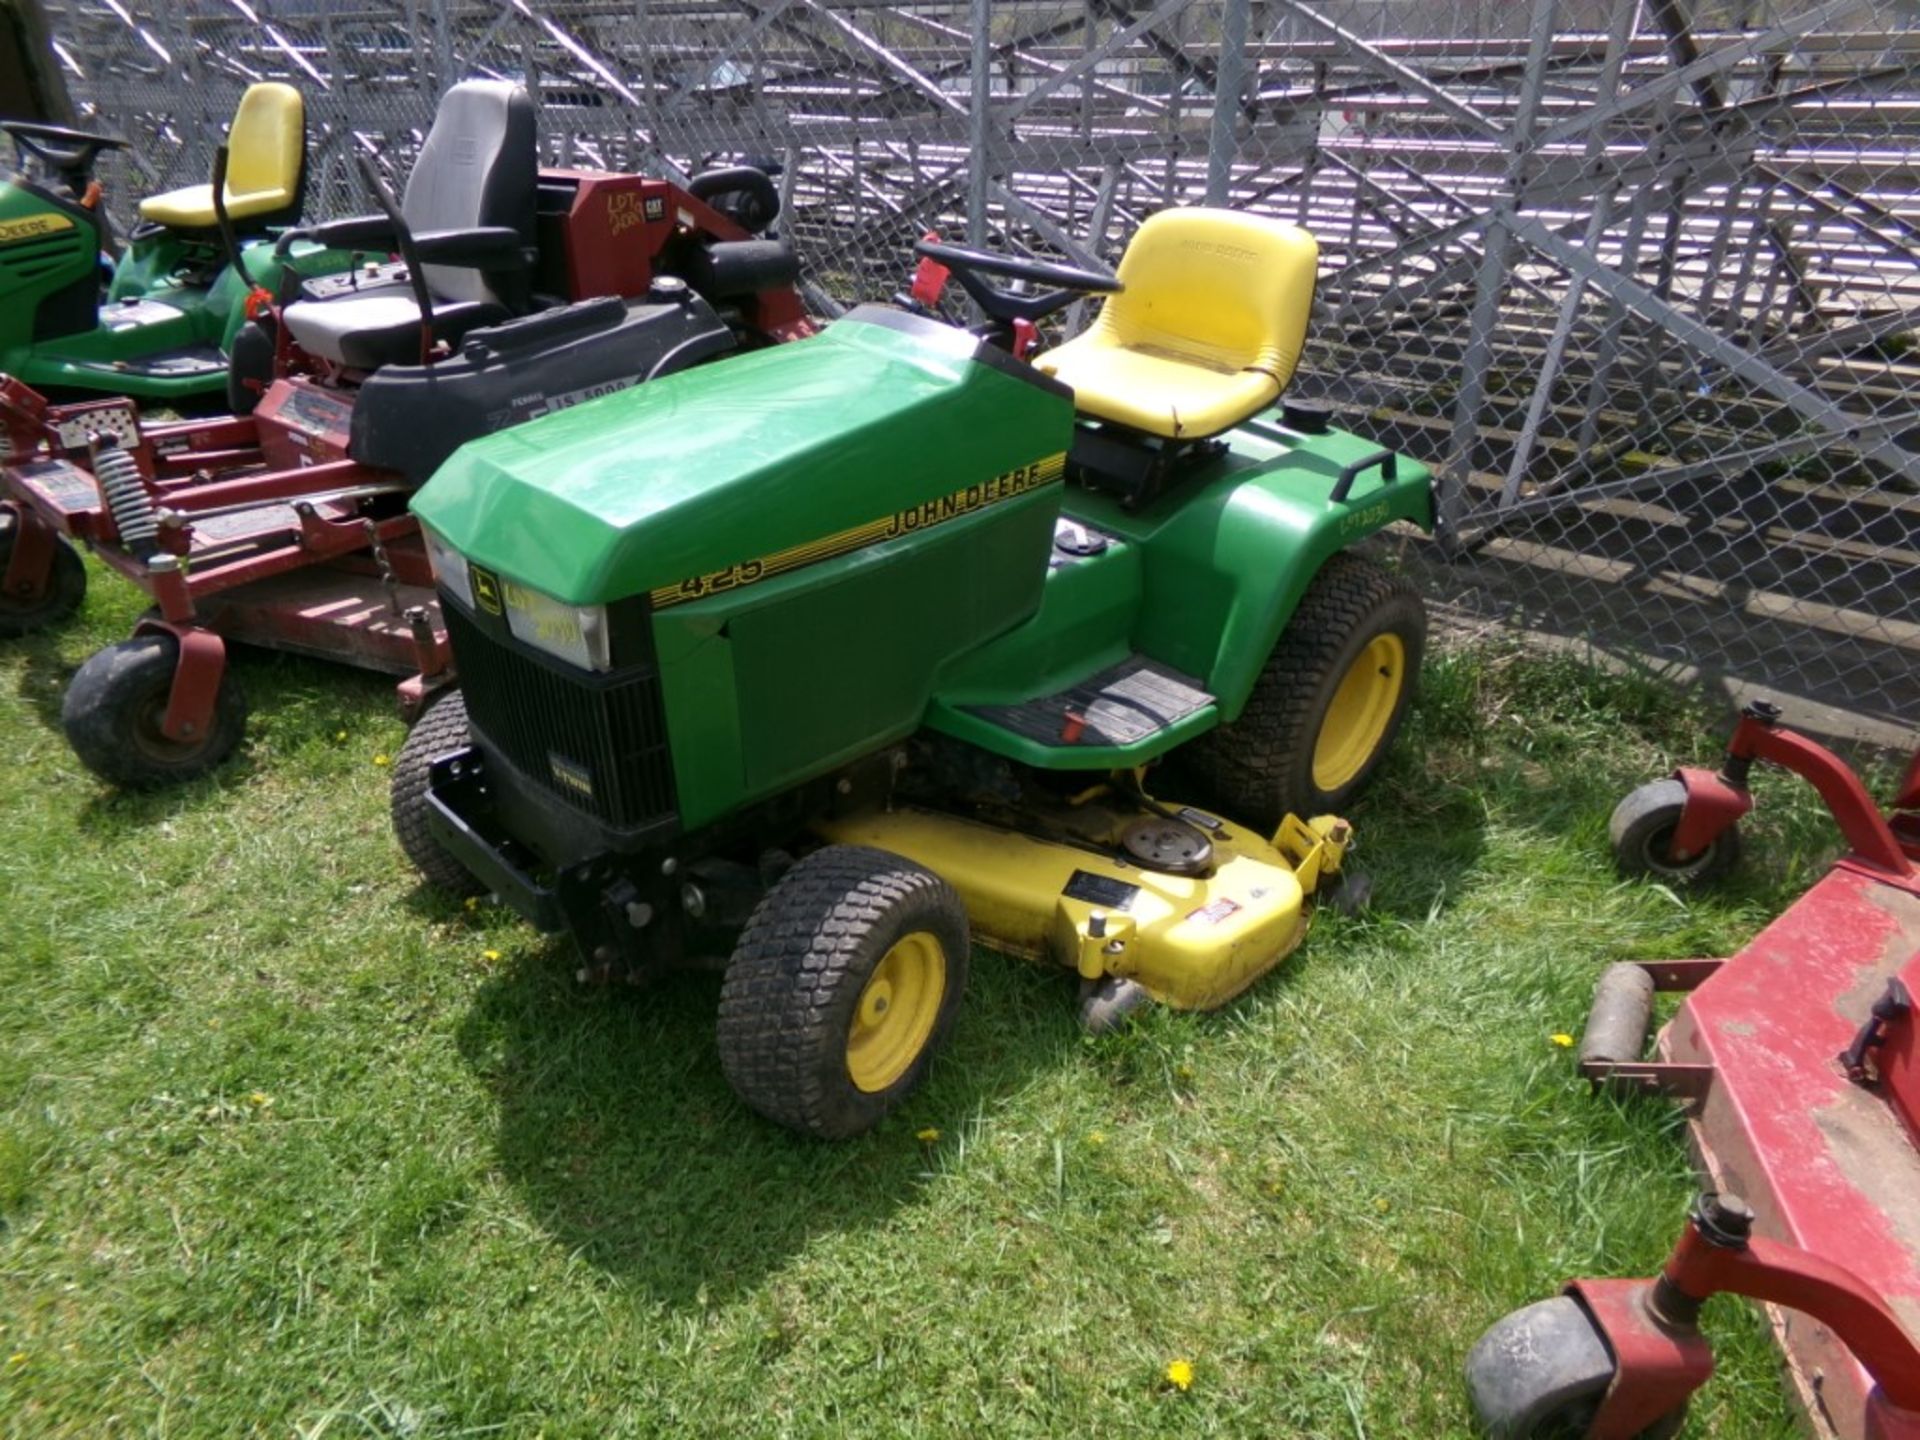 John Deere 425 Riding Mower w/54'' Deck, 20 Hp. V-Twin Engine, 580 Hours, s/n 055606, SMALL CRACK ON